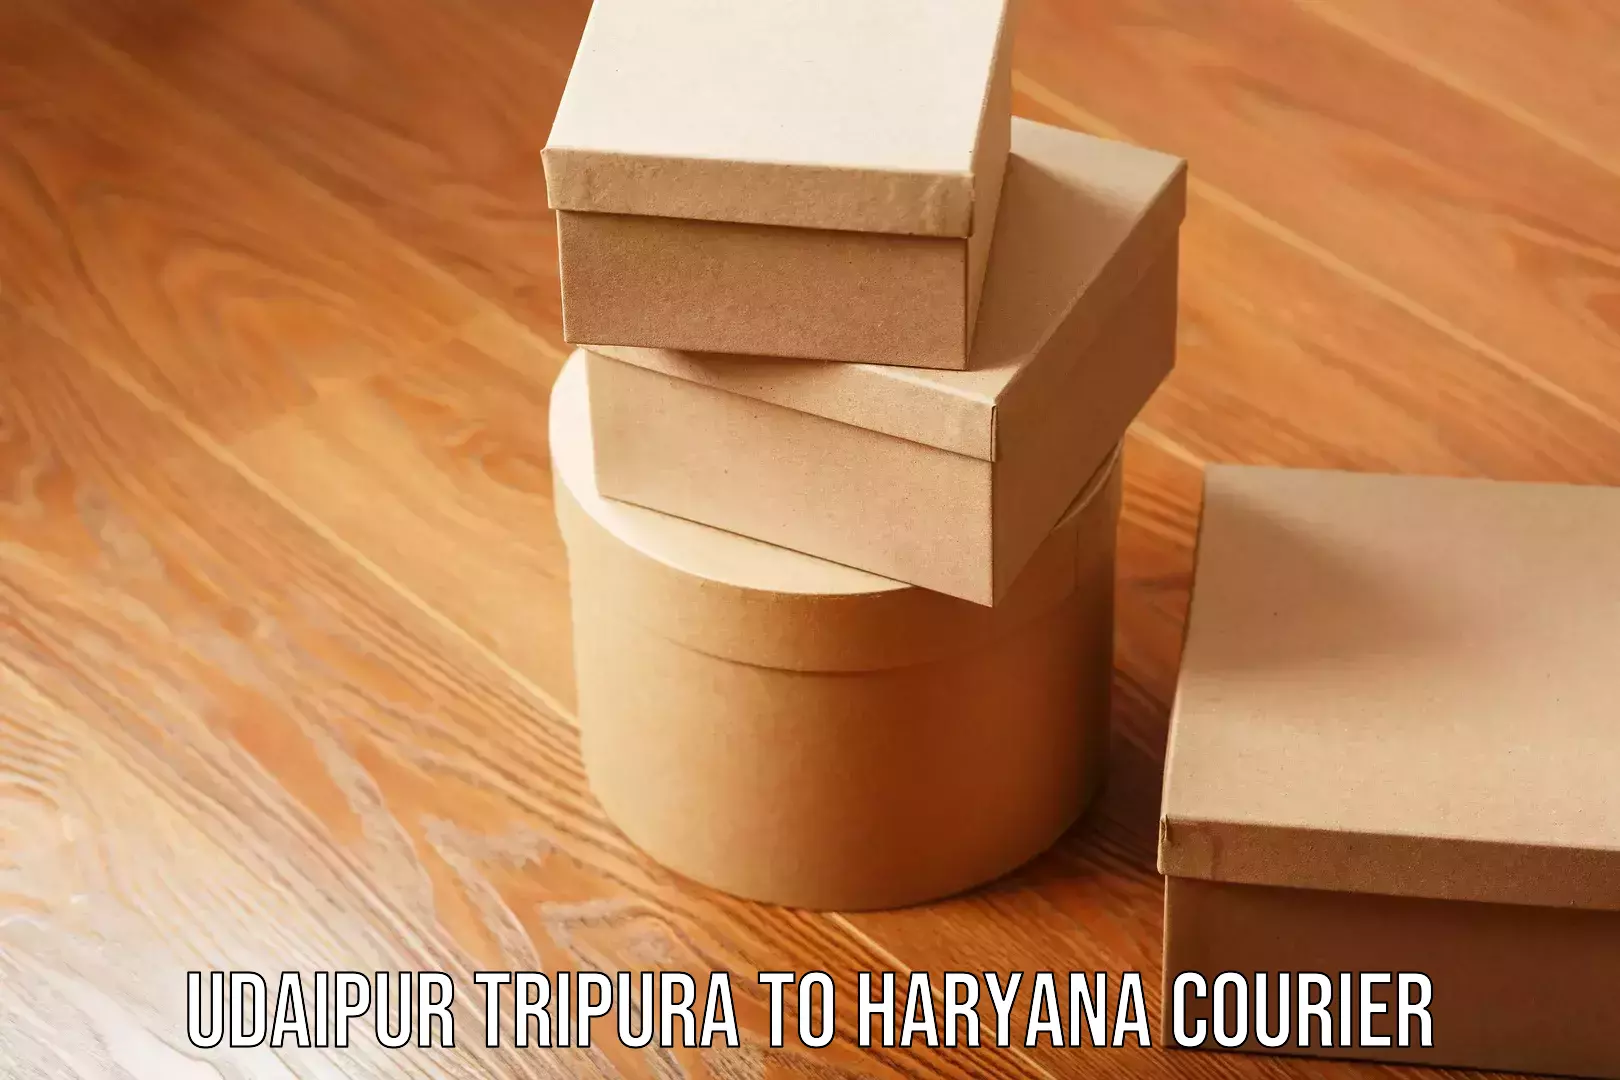 Cost-effective shipping solutions Udaipur Tripura to Haryana